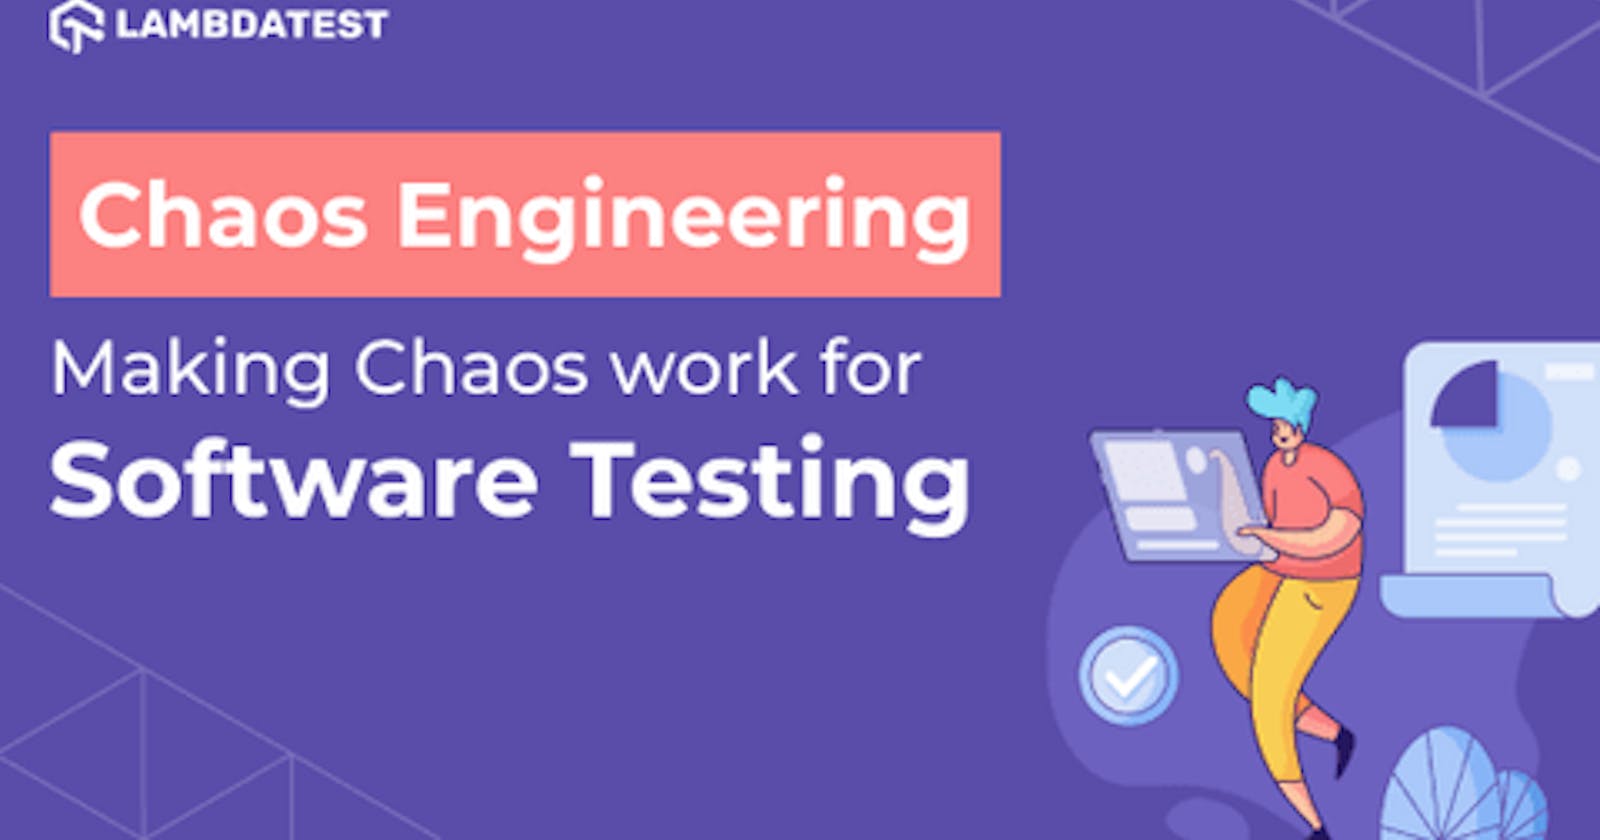 Chaos Engineering — Making Chaos work for Software Testing